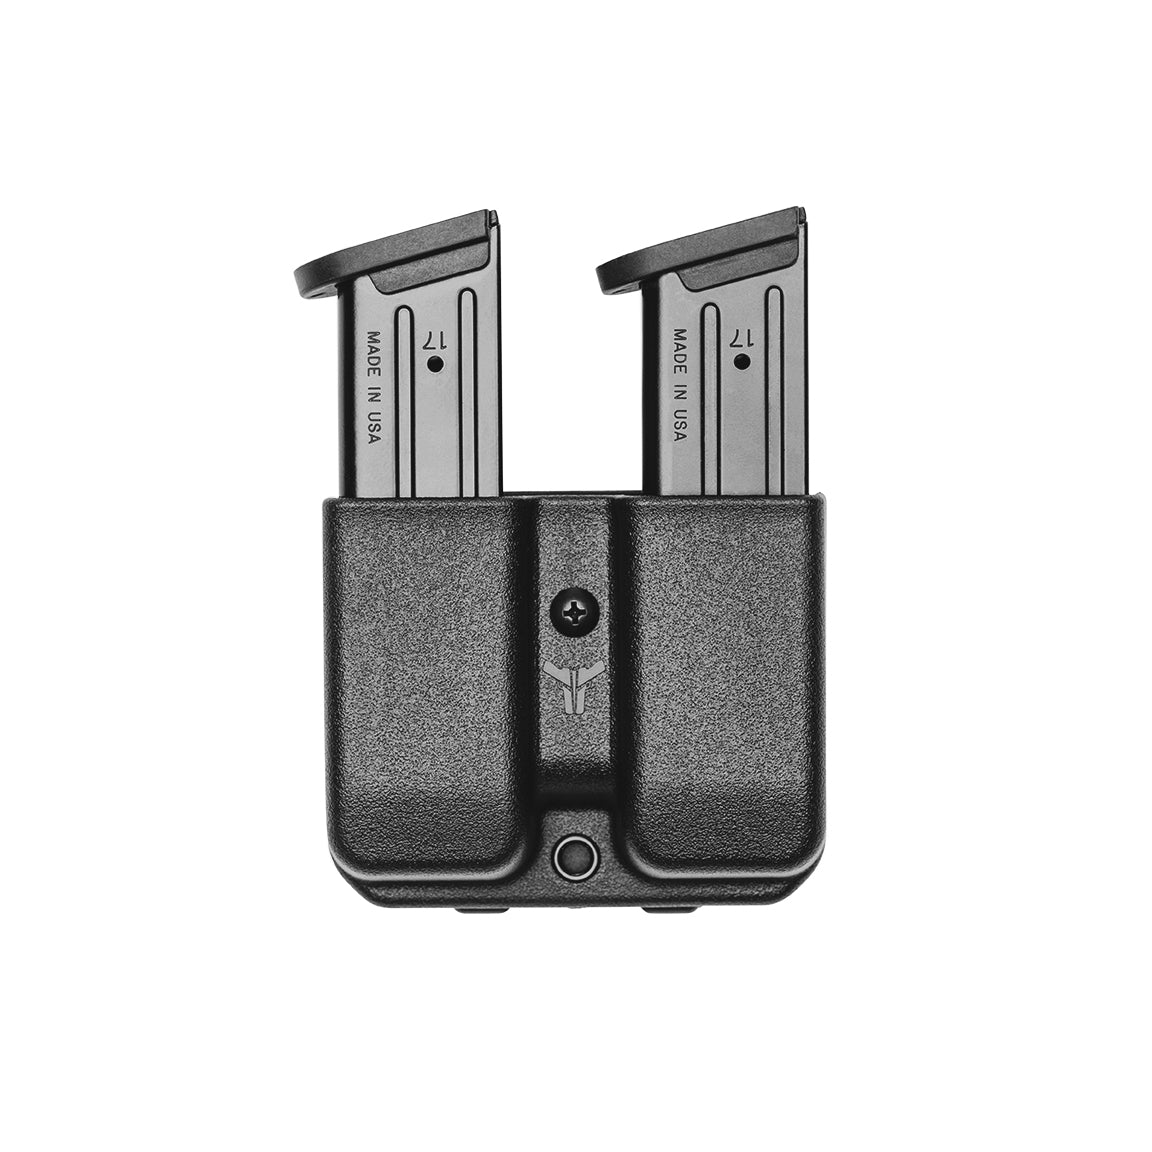 Signature Double Mag Pouch from Blade-Tech